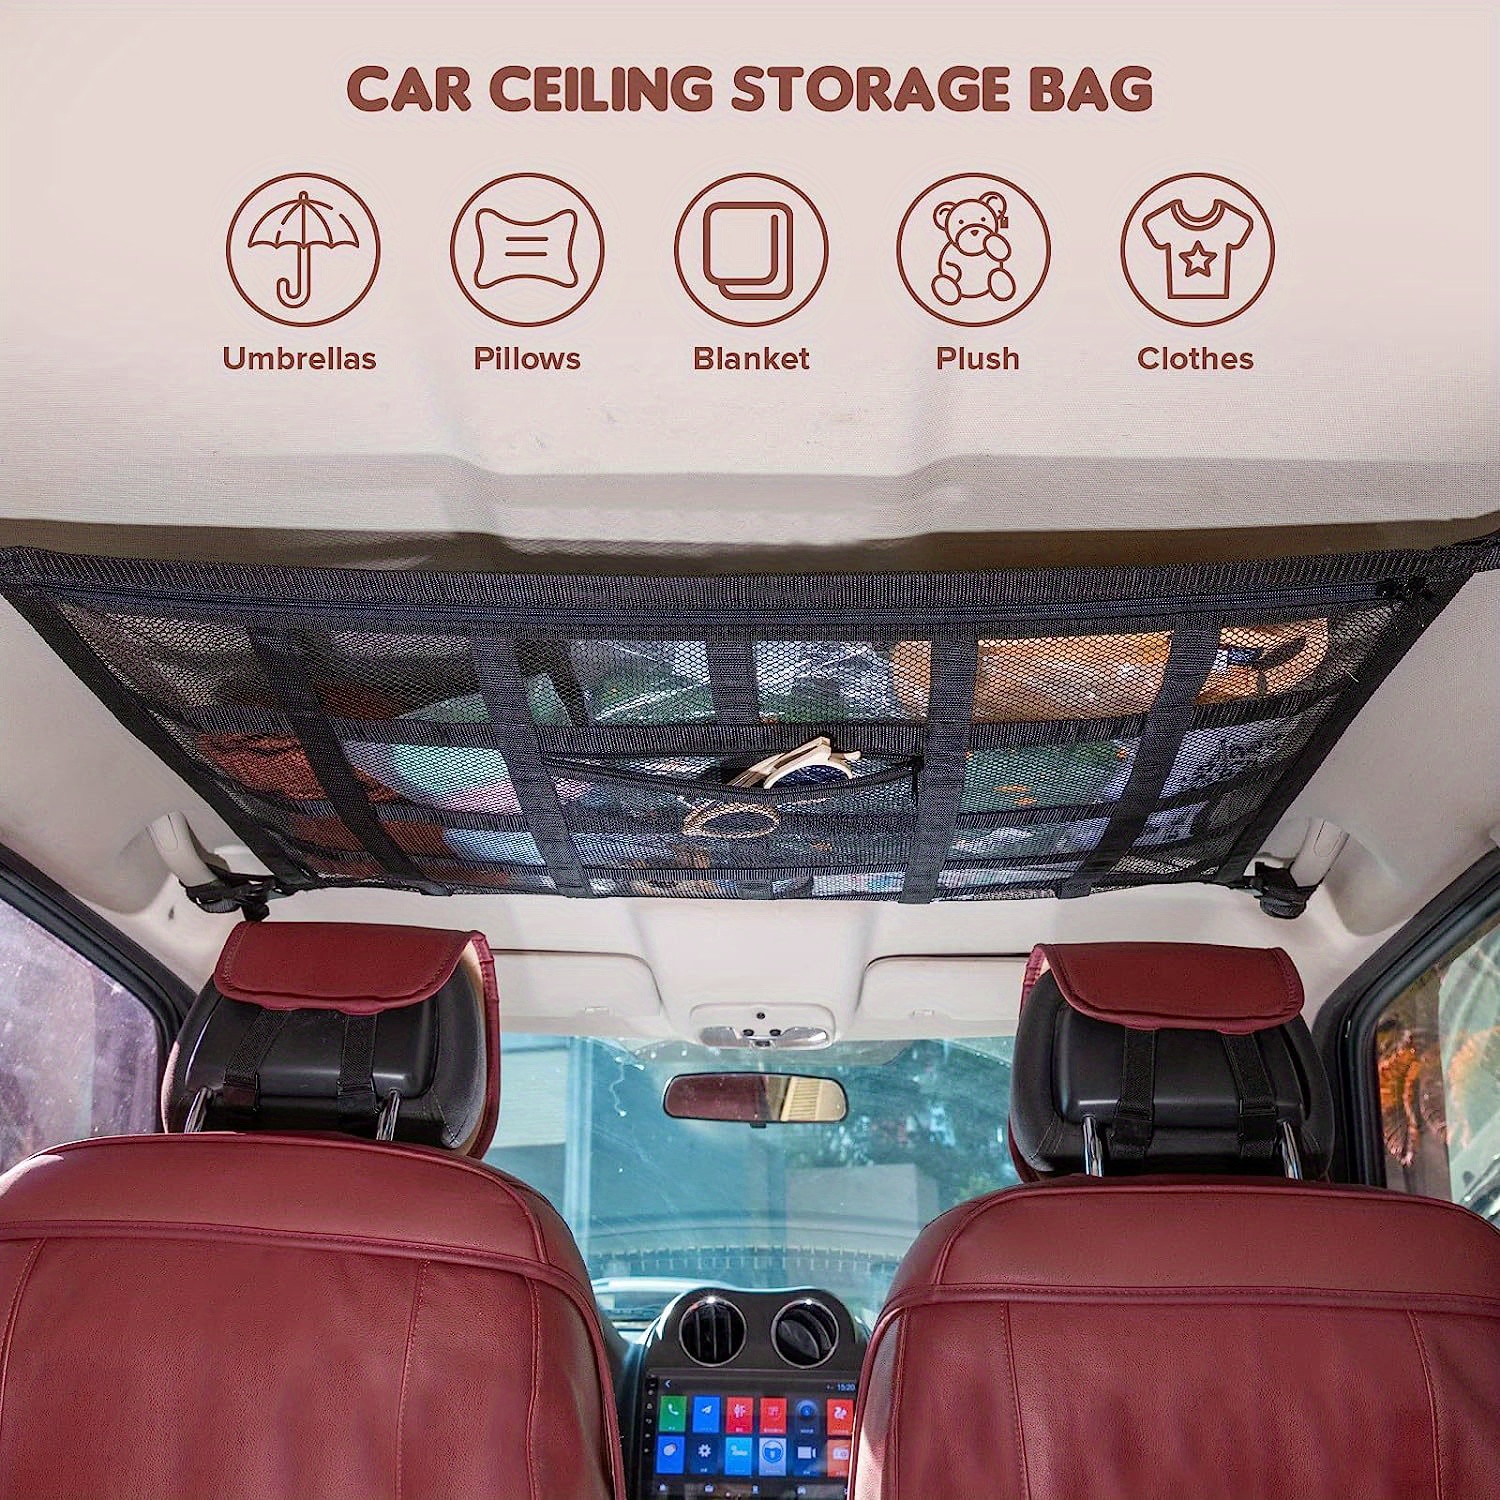 Dropship Cargo Net Seat Organizer to Sell Online at a Lower Price